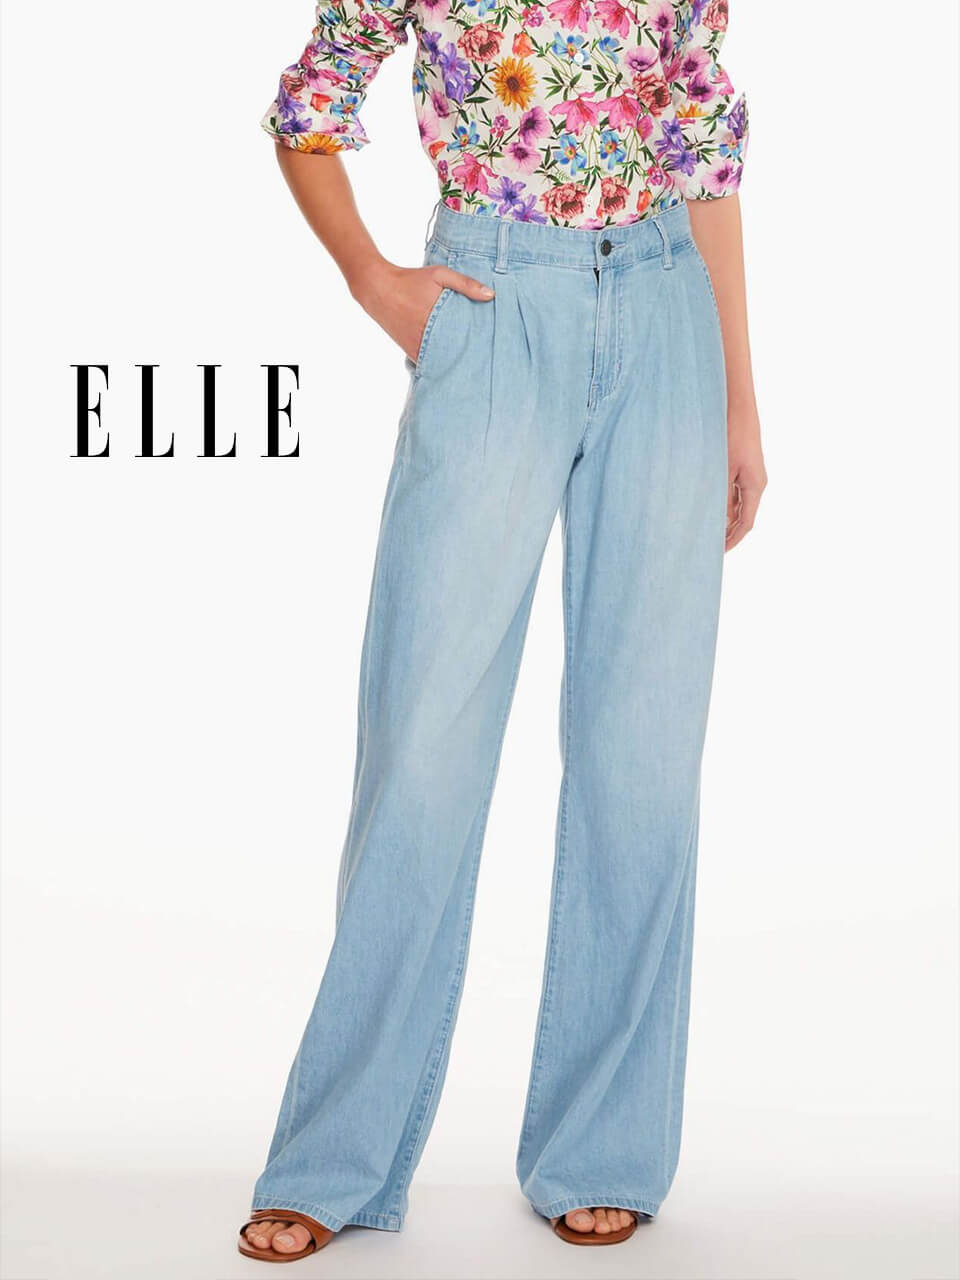 ELLE: These Wide-Leg Jeans Are a Chic Answer to the Denim Debate